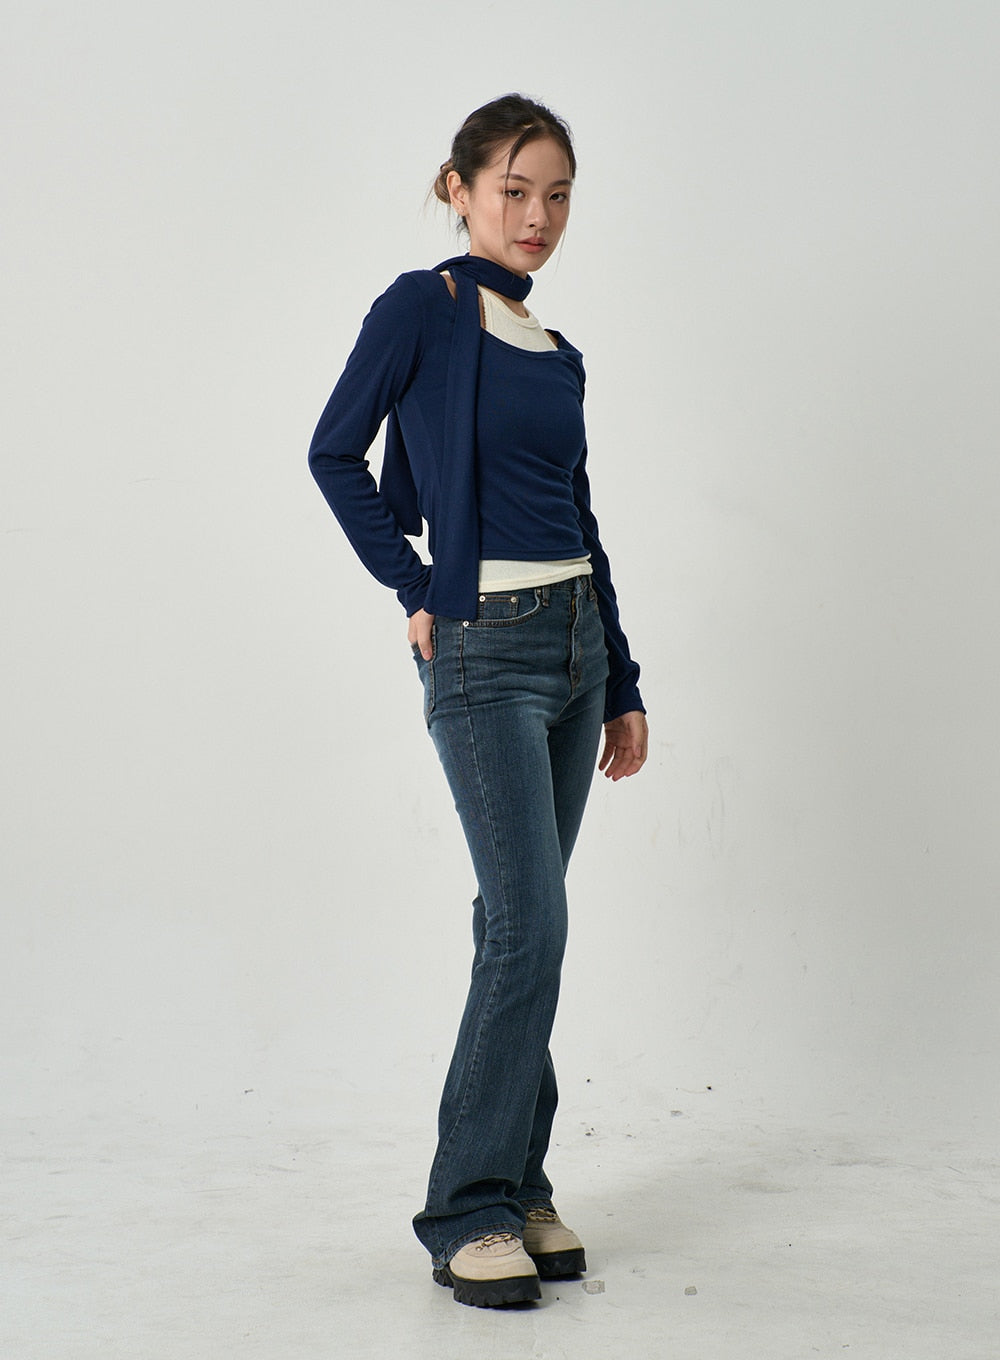 U-Neck Long Sleeve Top And Scarf Set CD19